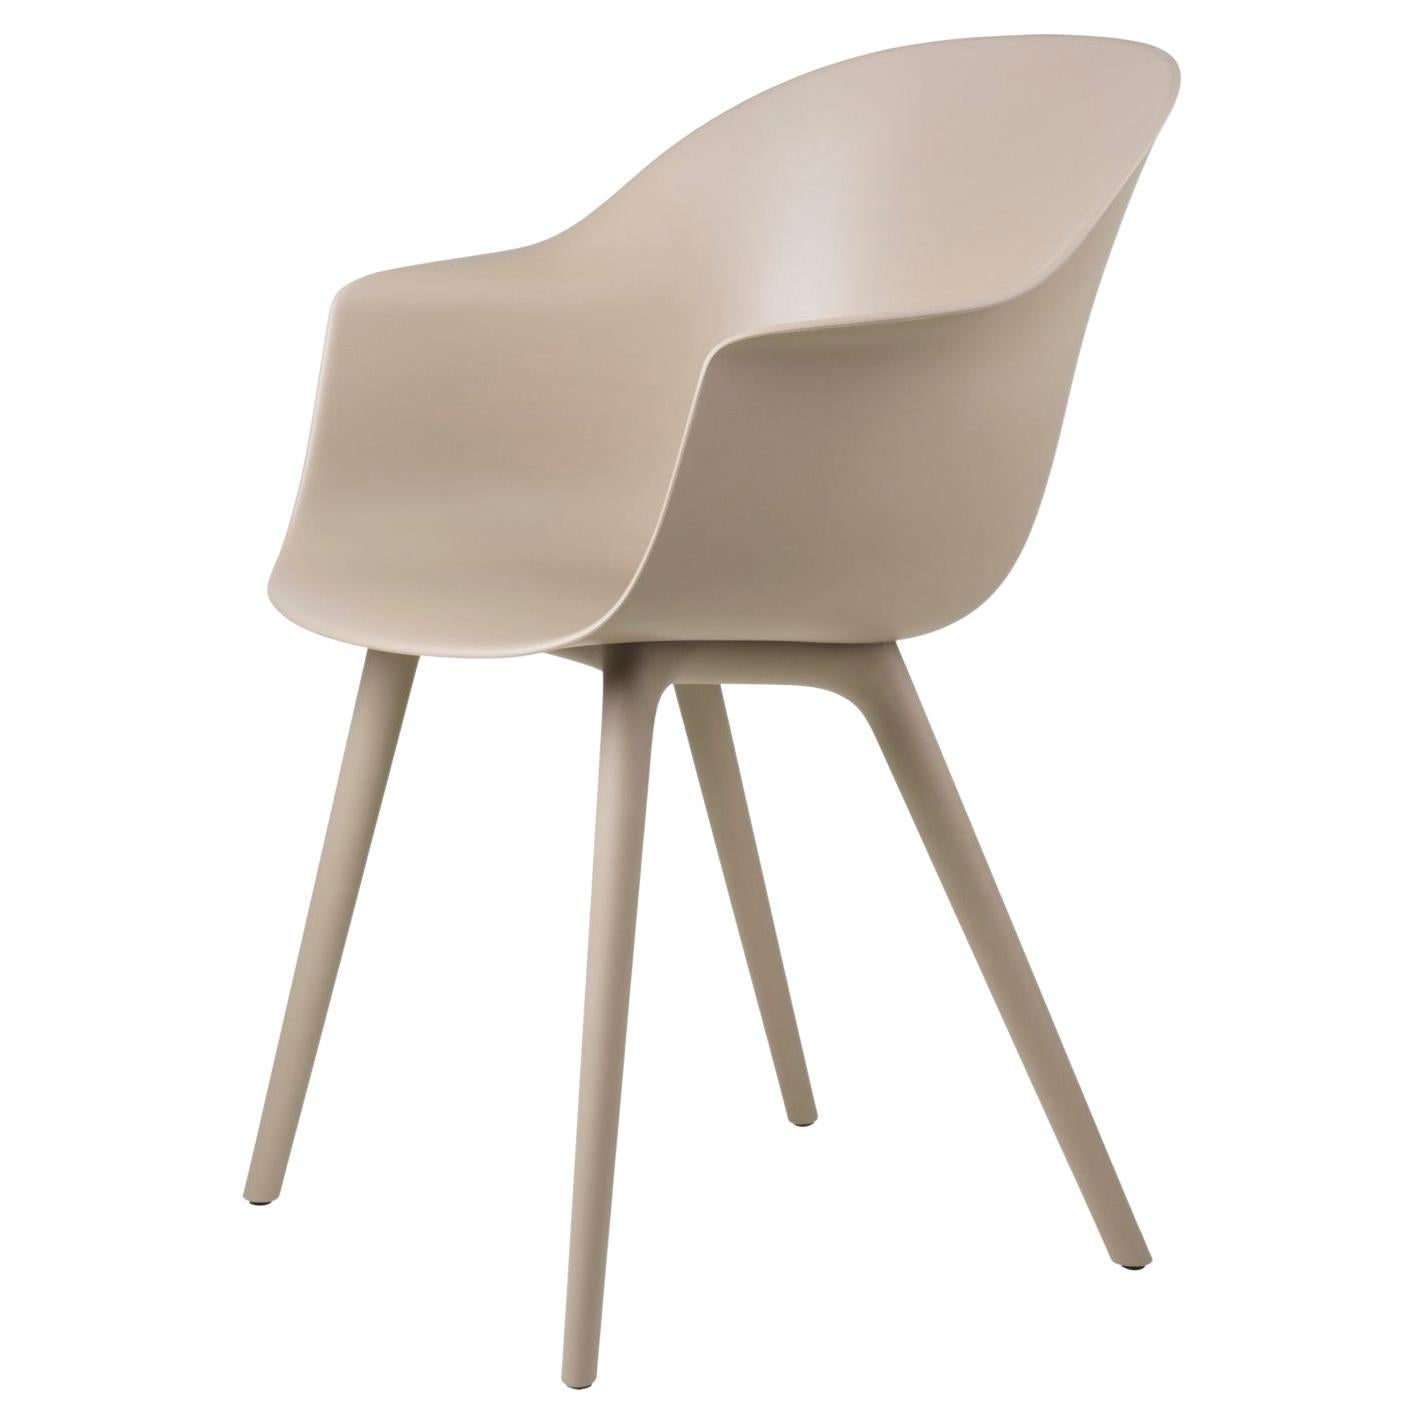 The Bat Chair is created with a Scandinavian approach to crafts, simplicity and functionalism by Danish-Italian design-duo GamFratesi. The embracing shell with armrests equally embodies both aesthetics and comfort while carrying strong references to